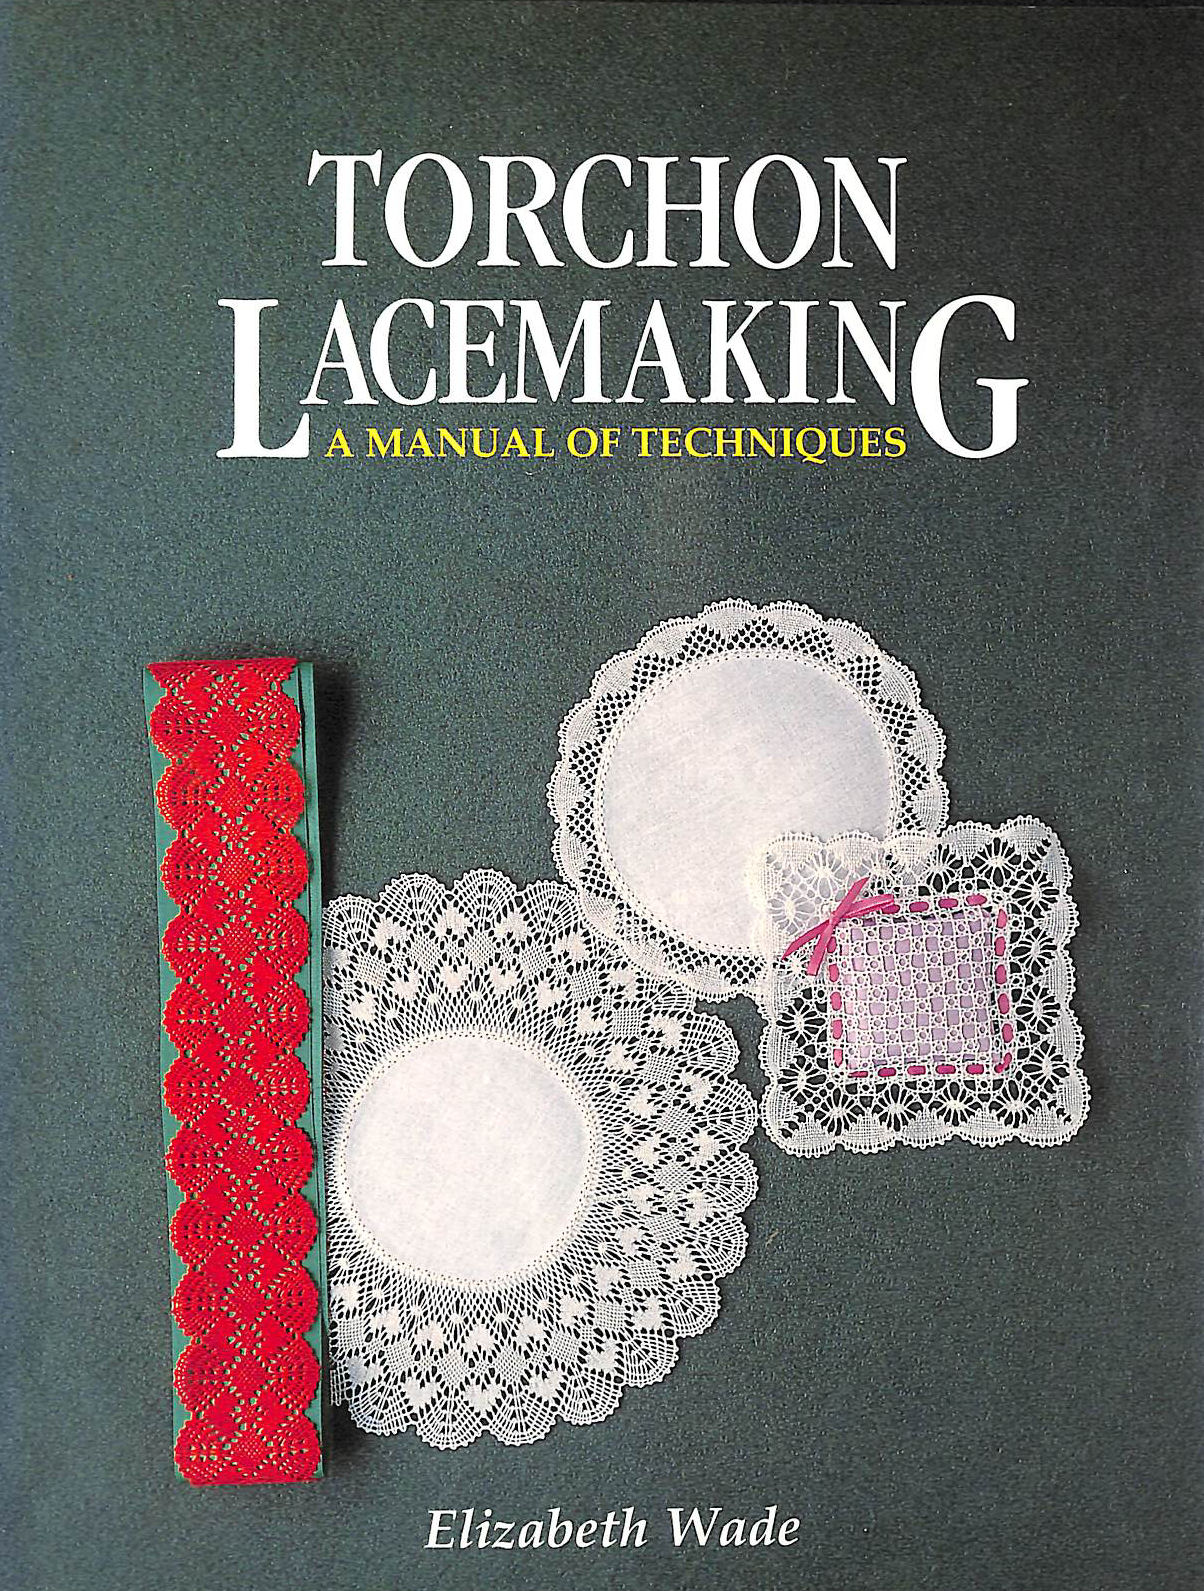 WADE, ELIZABETH - Torchon Lacemaking: A Manual of Techniques